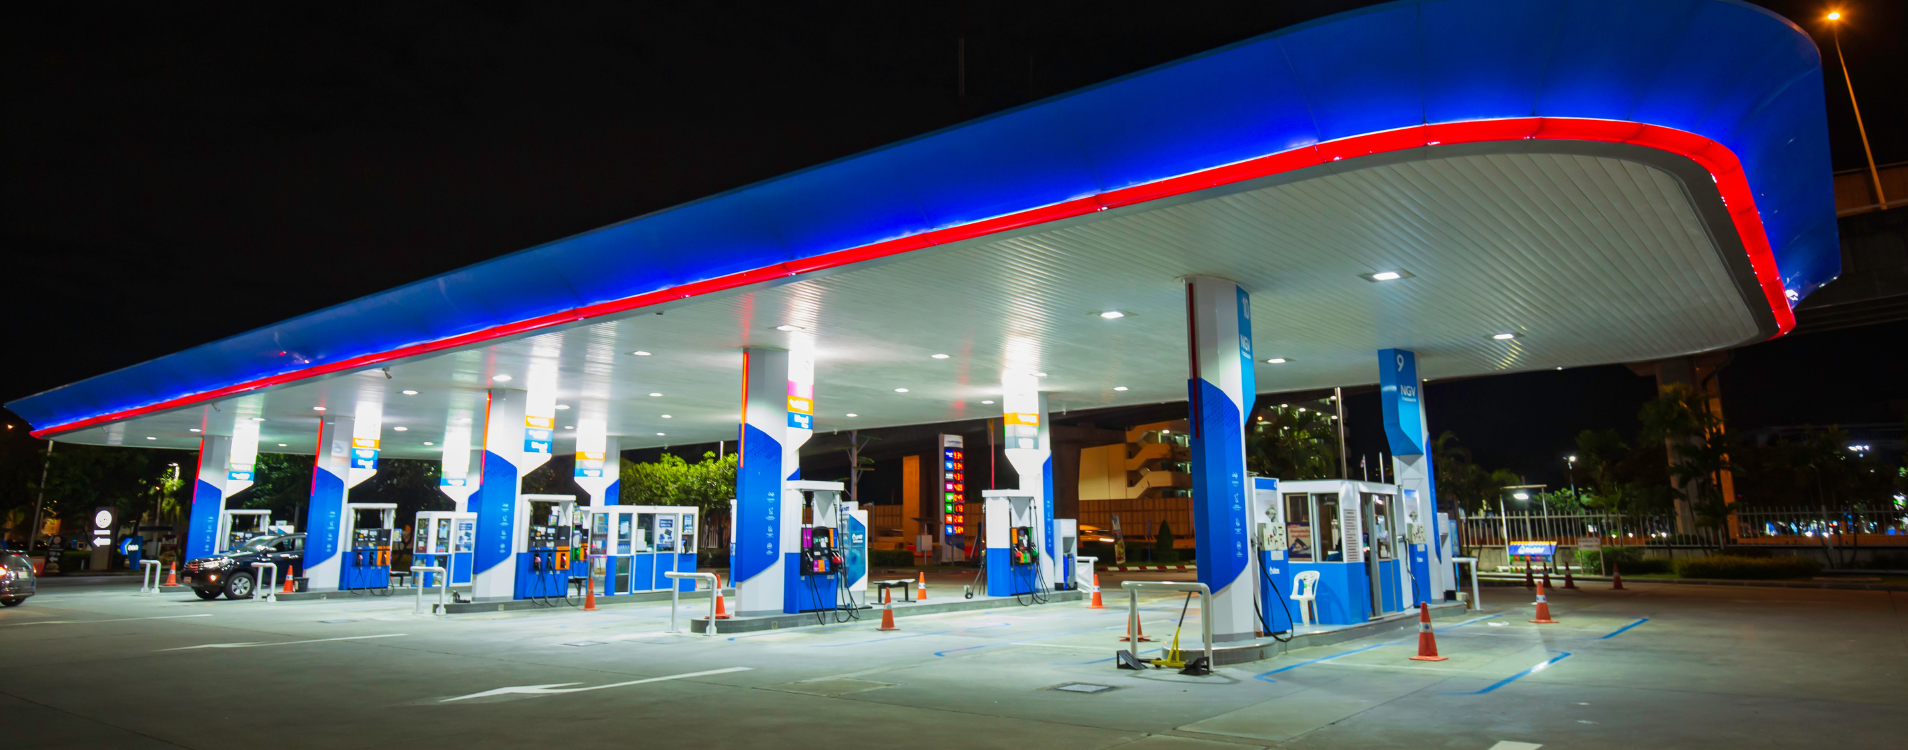 Fueling station at night